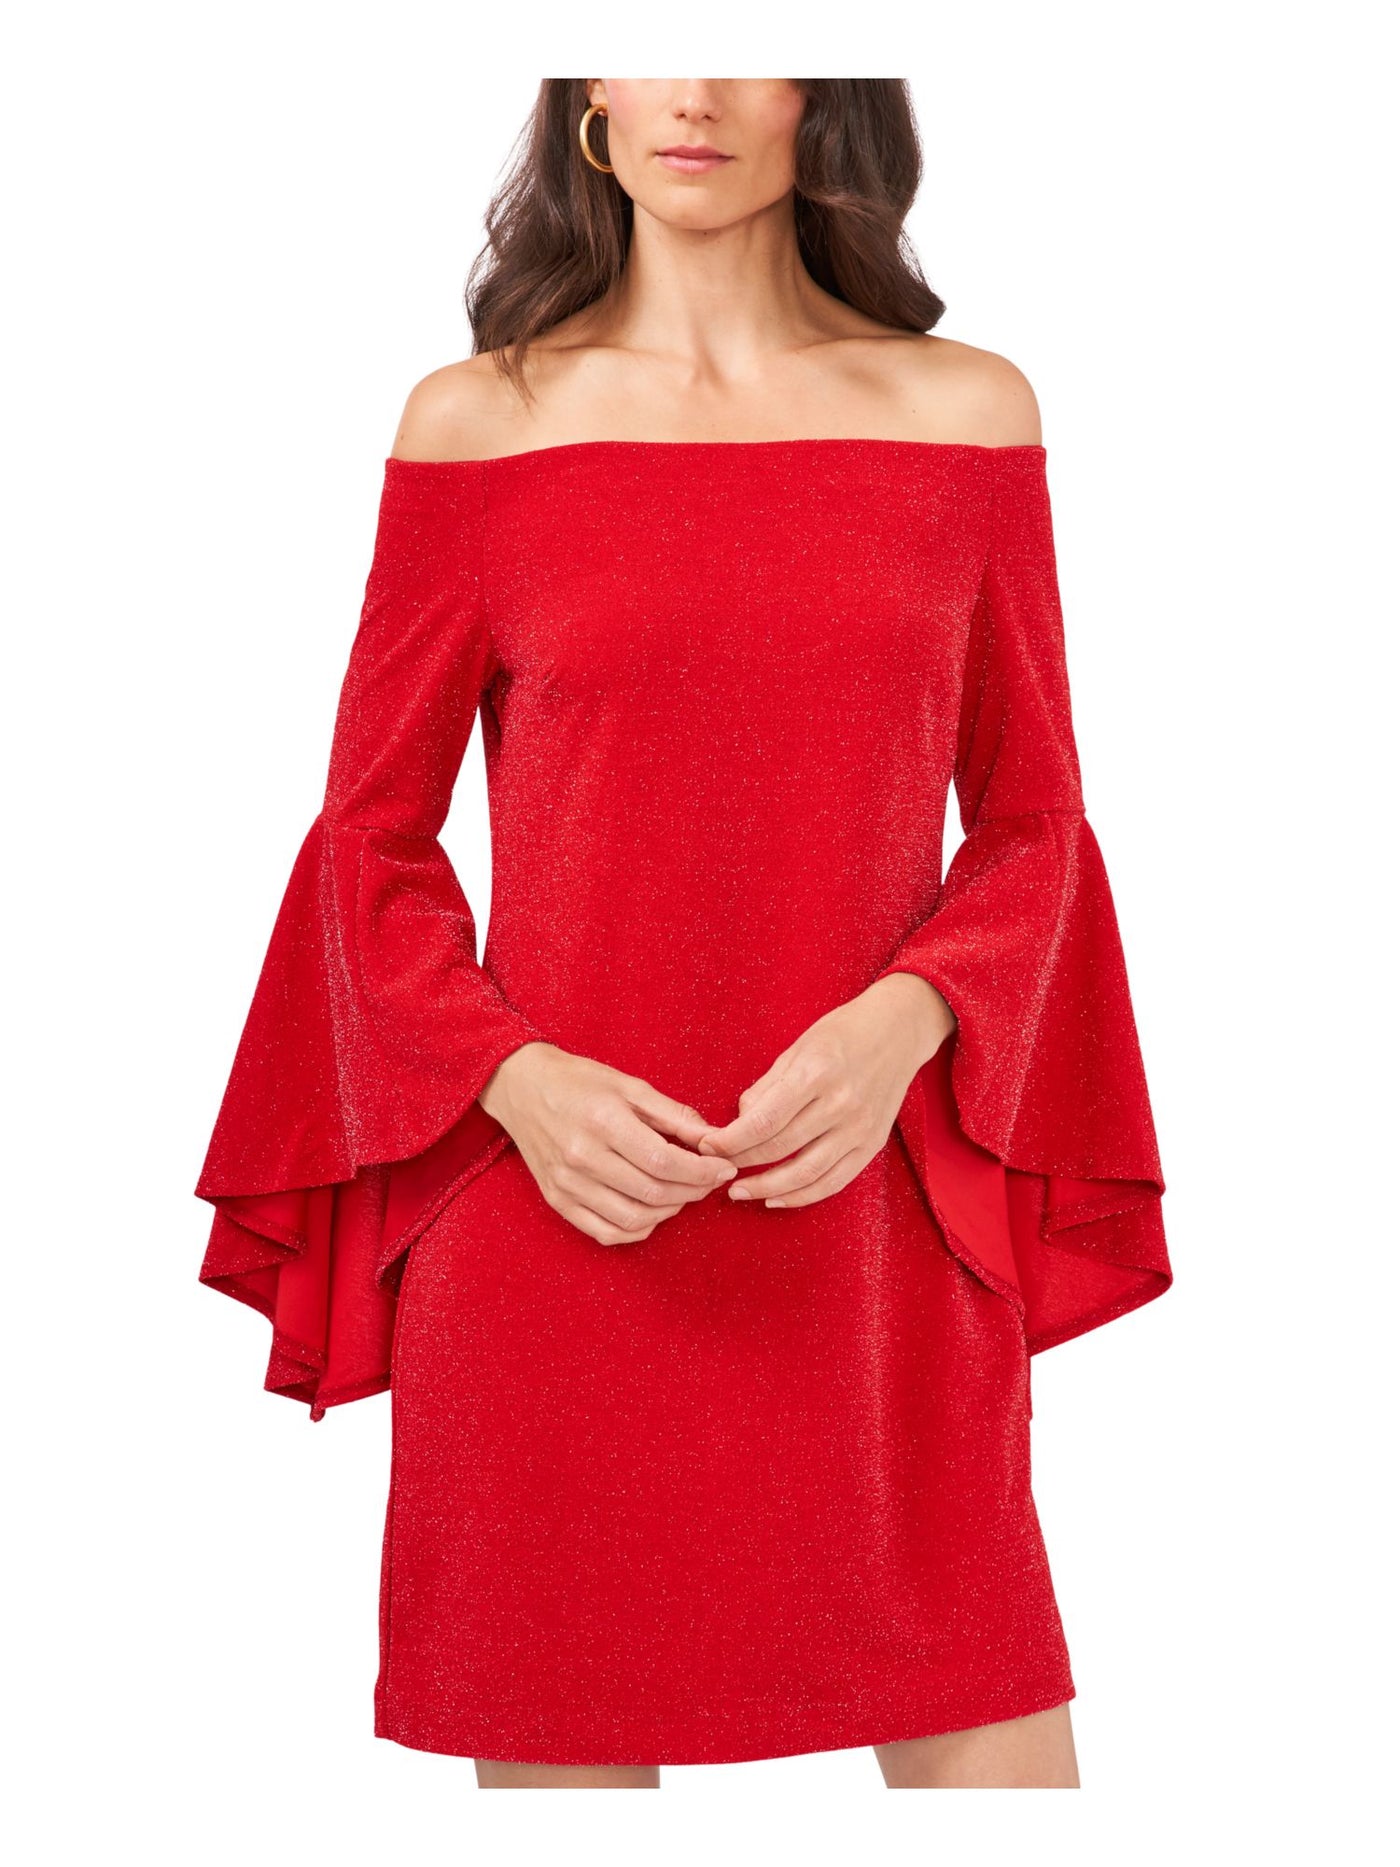 VINCE CAMUTO Womens Red Glitter Pullover Lined Bell Sleeve Off Shoulder Short Cocktail Shift Dress M